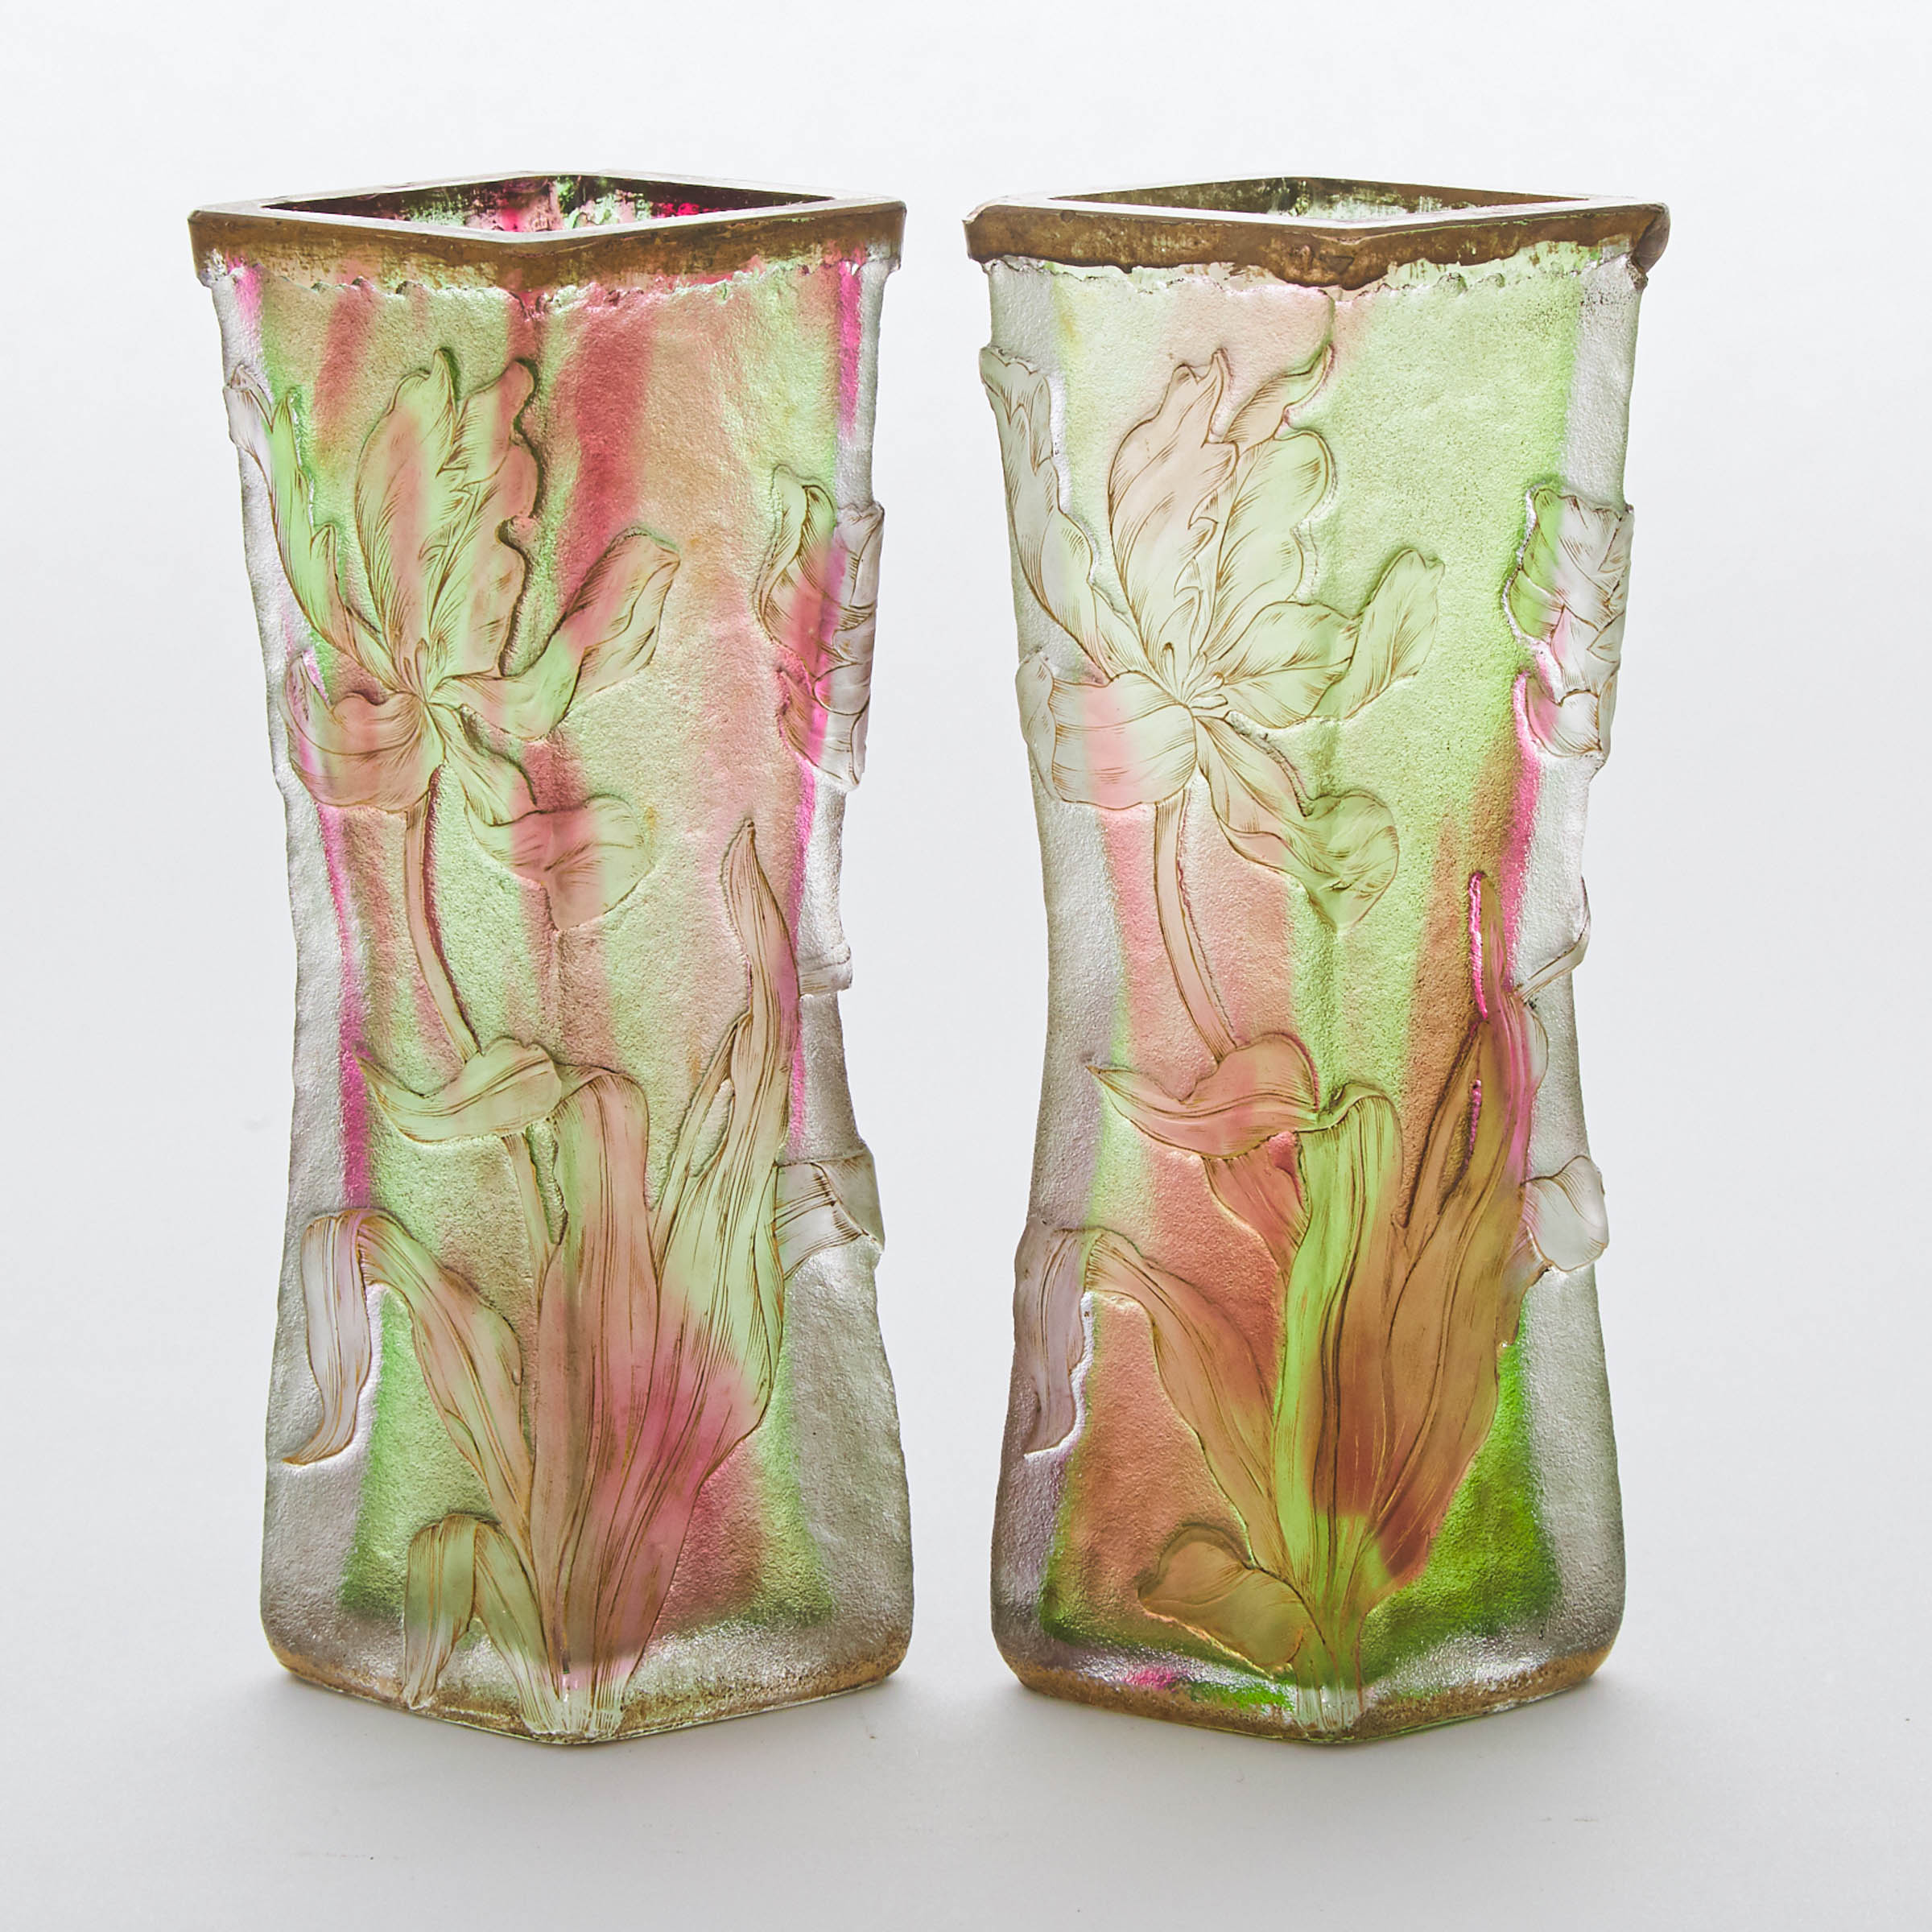 Pair of Daum Gilt Red and Green Cameo Glass Vases, c.1890